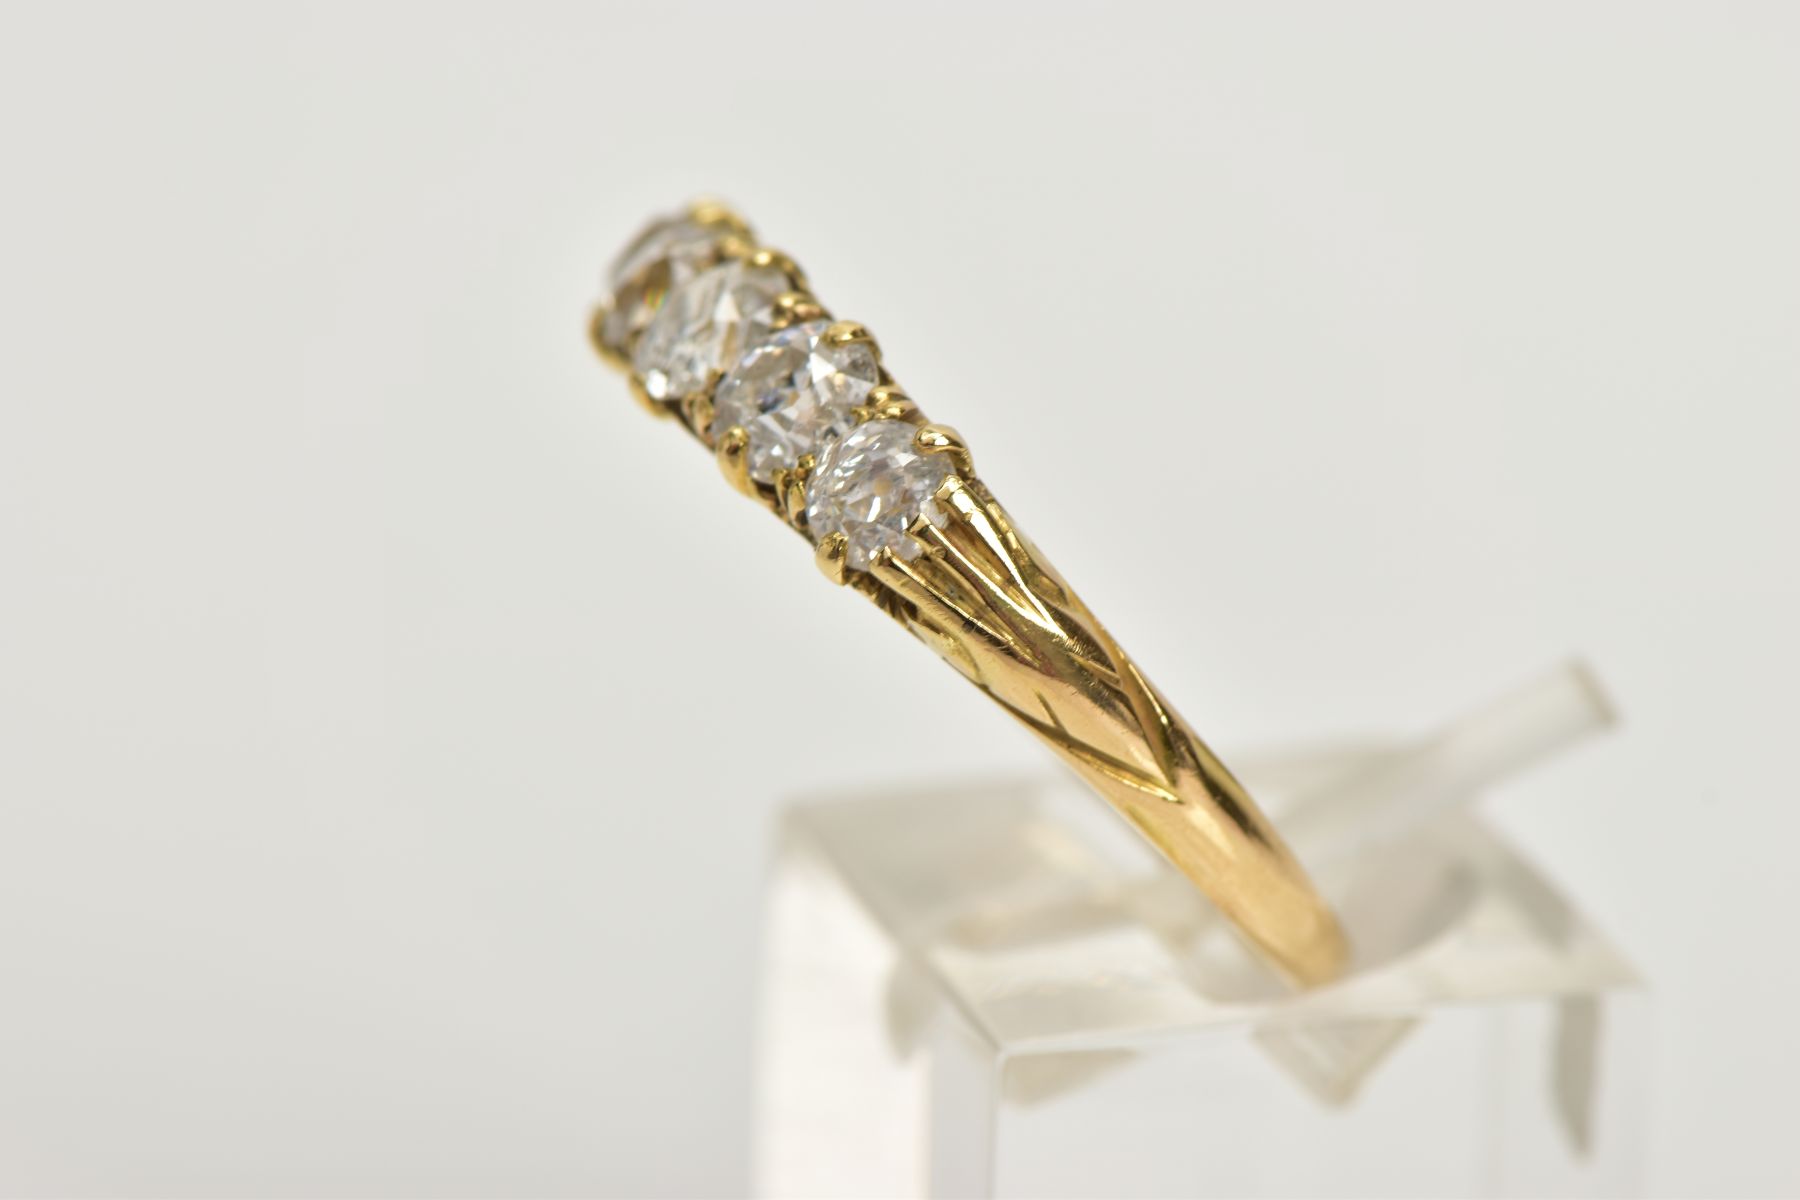 A YELLOW METAL FIVE STONE DIAMOND RING, designed with a row of five old cut diamonds, estimated - Image 2 of 4